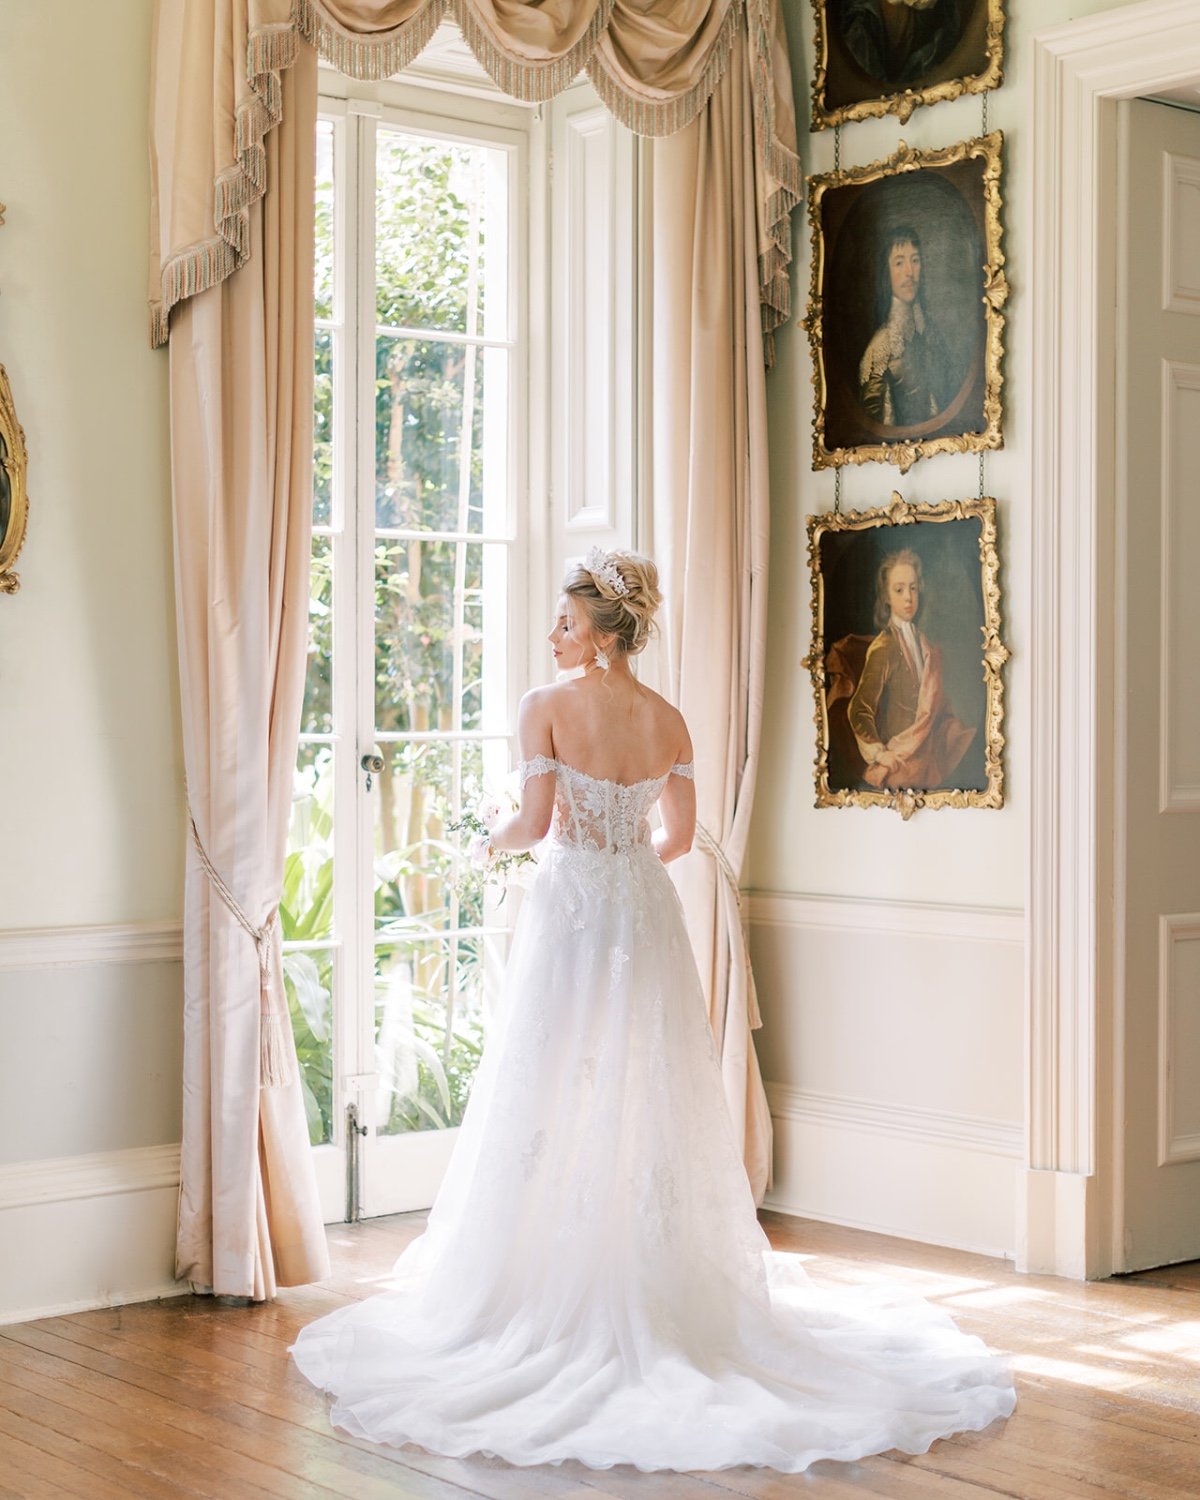 Blush Opulence nestled in the quintessentially English countryside